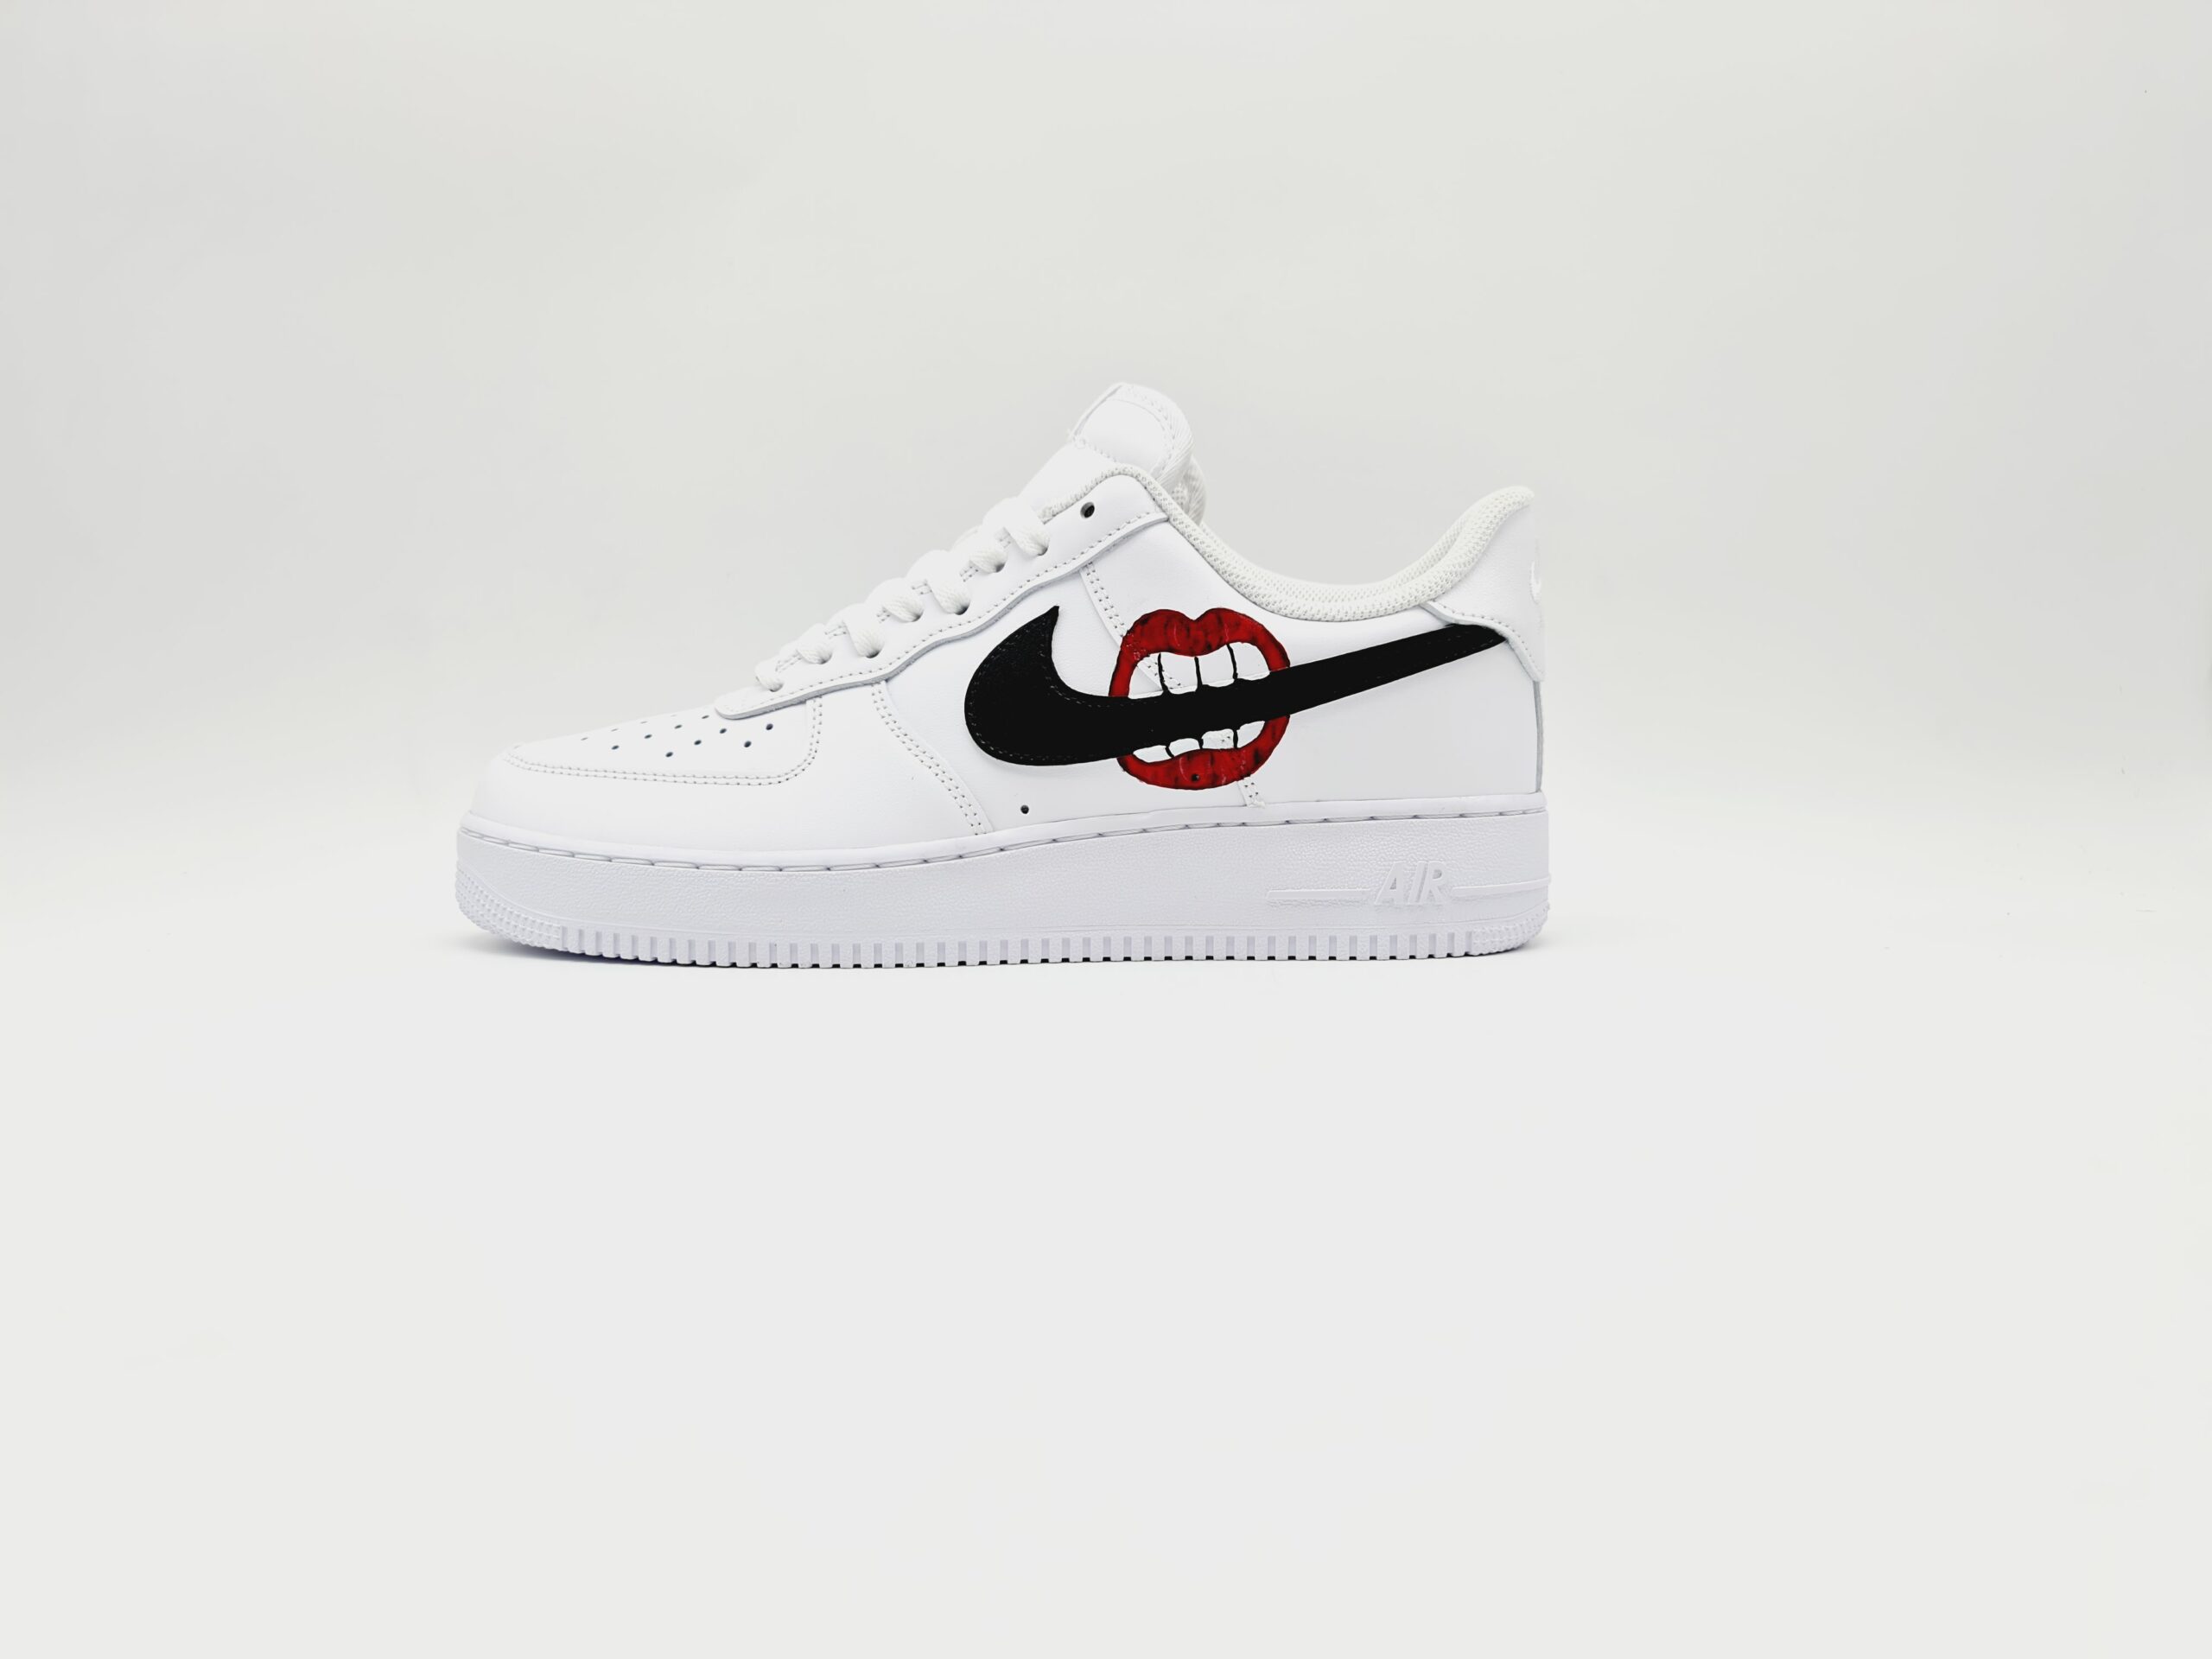 Want a change? Wear the Nike air force one mouth from Double G Customs !